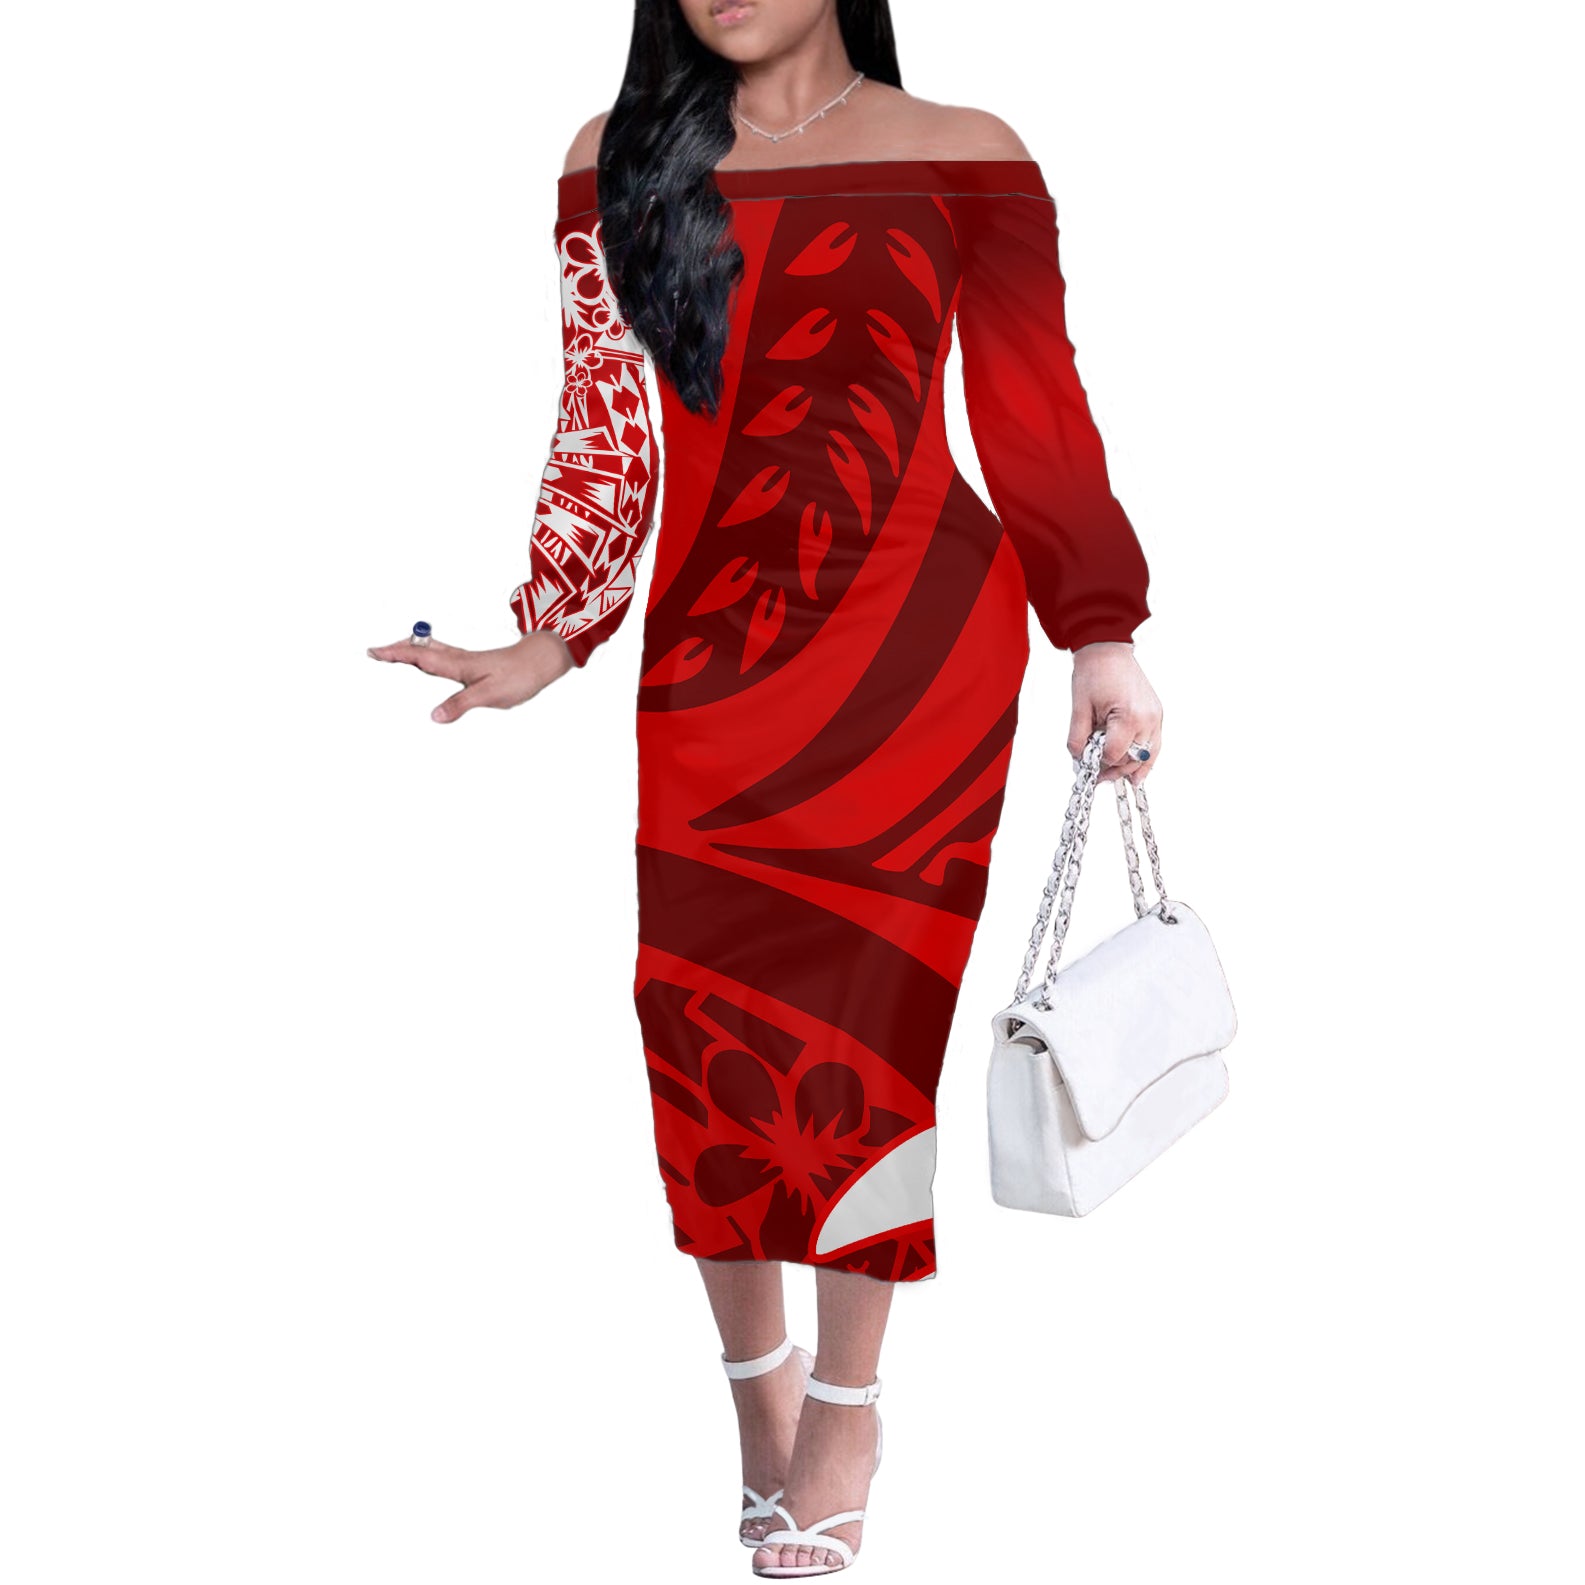 Polynesian Off The Shoulder Long Sleeve Dress Pacific Flower Mix Floral Tribal Tattoo Red Vibe LT9 Women Red - Polynesian Pride